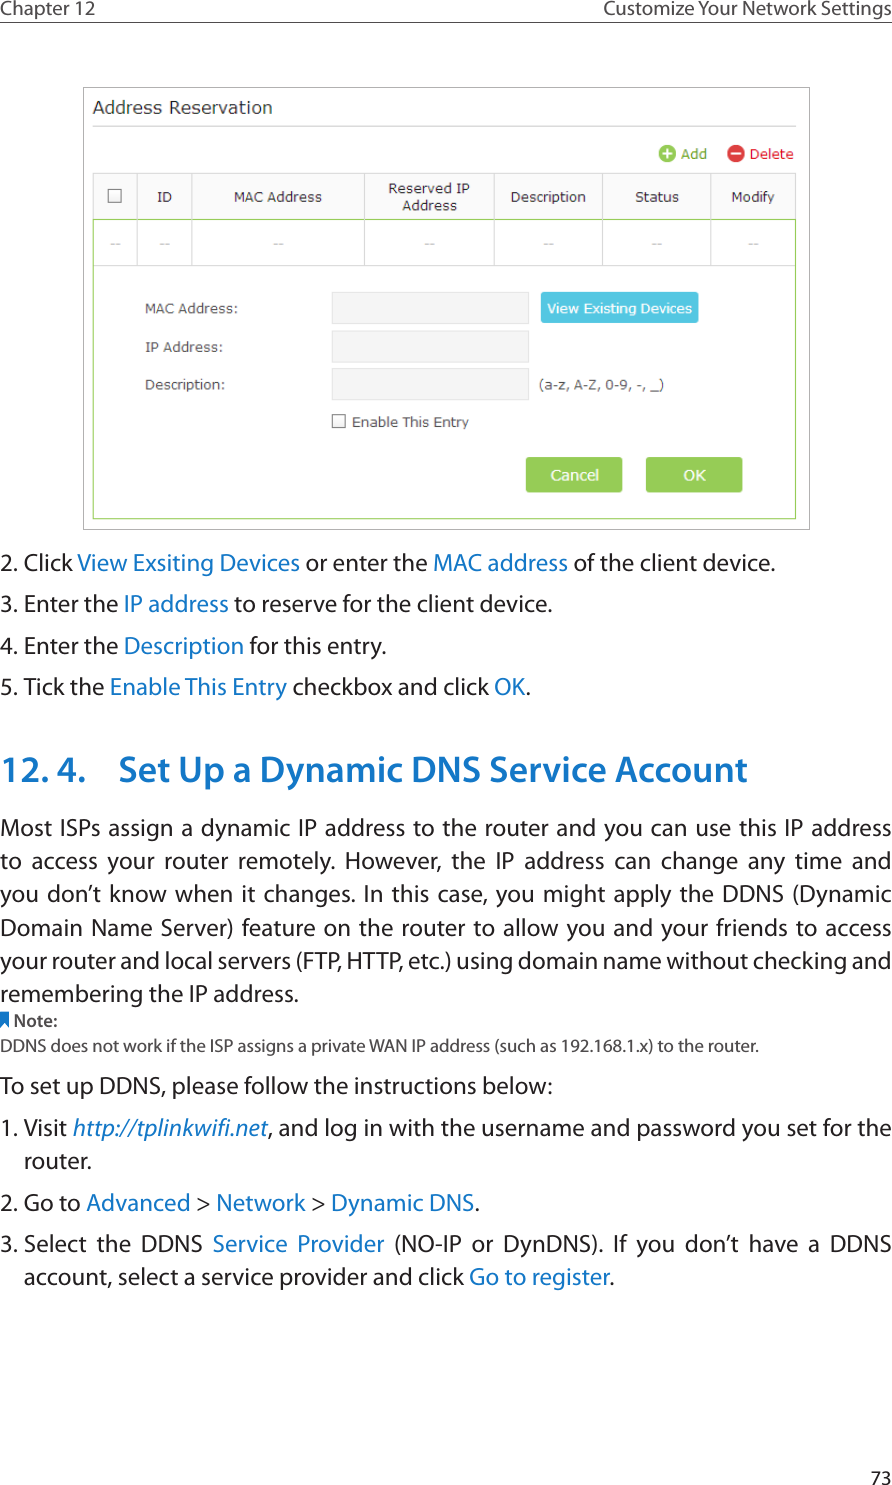 73Chapter 12 Customize Your Network Settings2. Click View Exsiting Devices or enter the MAC address of the client device.3. Enter the IP address to reserve for the client device.4. Enter the Description for this entry.5. Tick the Enable This Entry checkbox and click OK. 12. 4.  Set Up a Dynamic DNS Service AccountMost ISPs assign a dynamic IP address to the router and you can use this IP address to access your router remotely. However, the IP address can change any time and you don’t know when it changes. In this case, you might apply the DDNS (Dynamic Domain Name Server) feature on the router to allow you and your friends to access your router and local servers (FTP, HTTP, etc.) using domain name without checking and remembering the IP address. Note: DDNS does not work if the ISP assigns a private WAN IP address (such as 192.168.1.x) to the router. To set up DDNS, please follow the instructions below:1. Visit http://tplinkwifi.net, and log in with the username and password you set for the router.2. Go to Advanced &gt; Network &gt; Dynamic DNS.3. Select the DDNS Service Provider (NO-IP or DynDNS). If you don’t have a DDNS account, select a service provider and click Go to register.